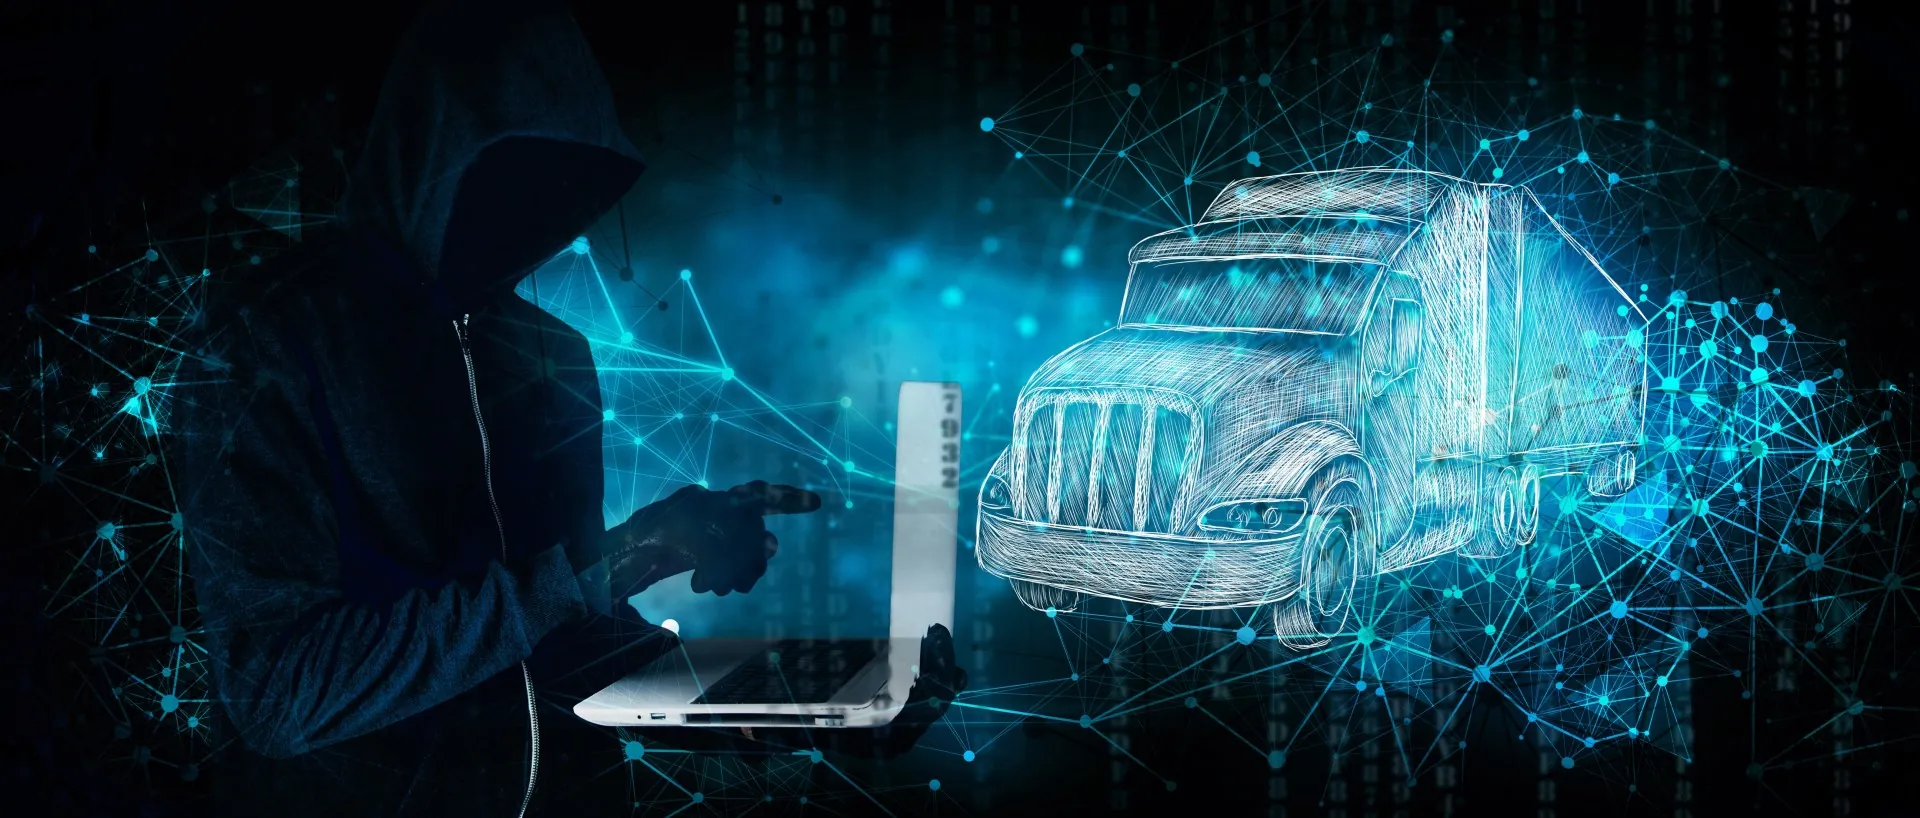 Cargo-theft-and-protecting-your-freight-robber-on-computer-with-truck-graphic